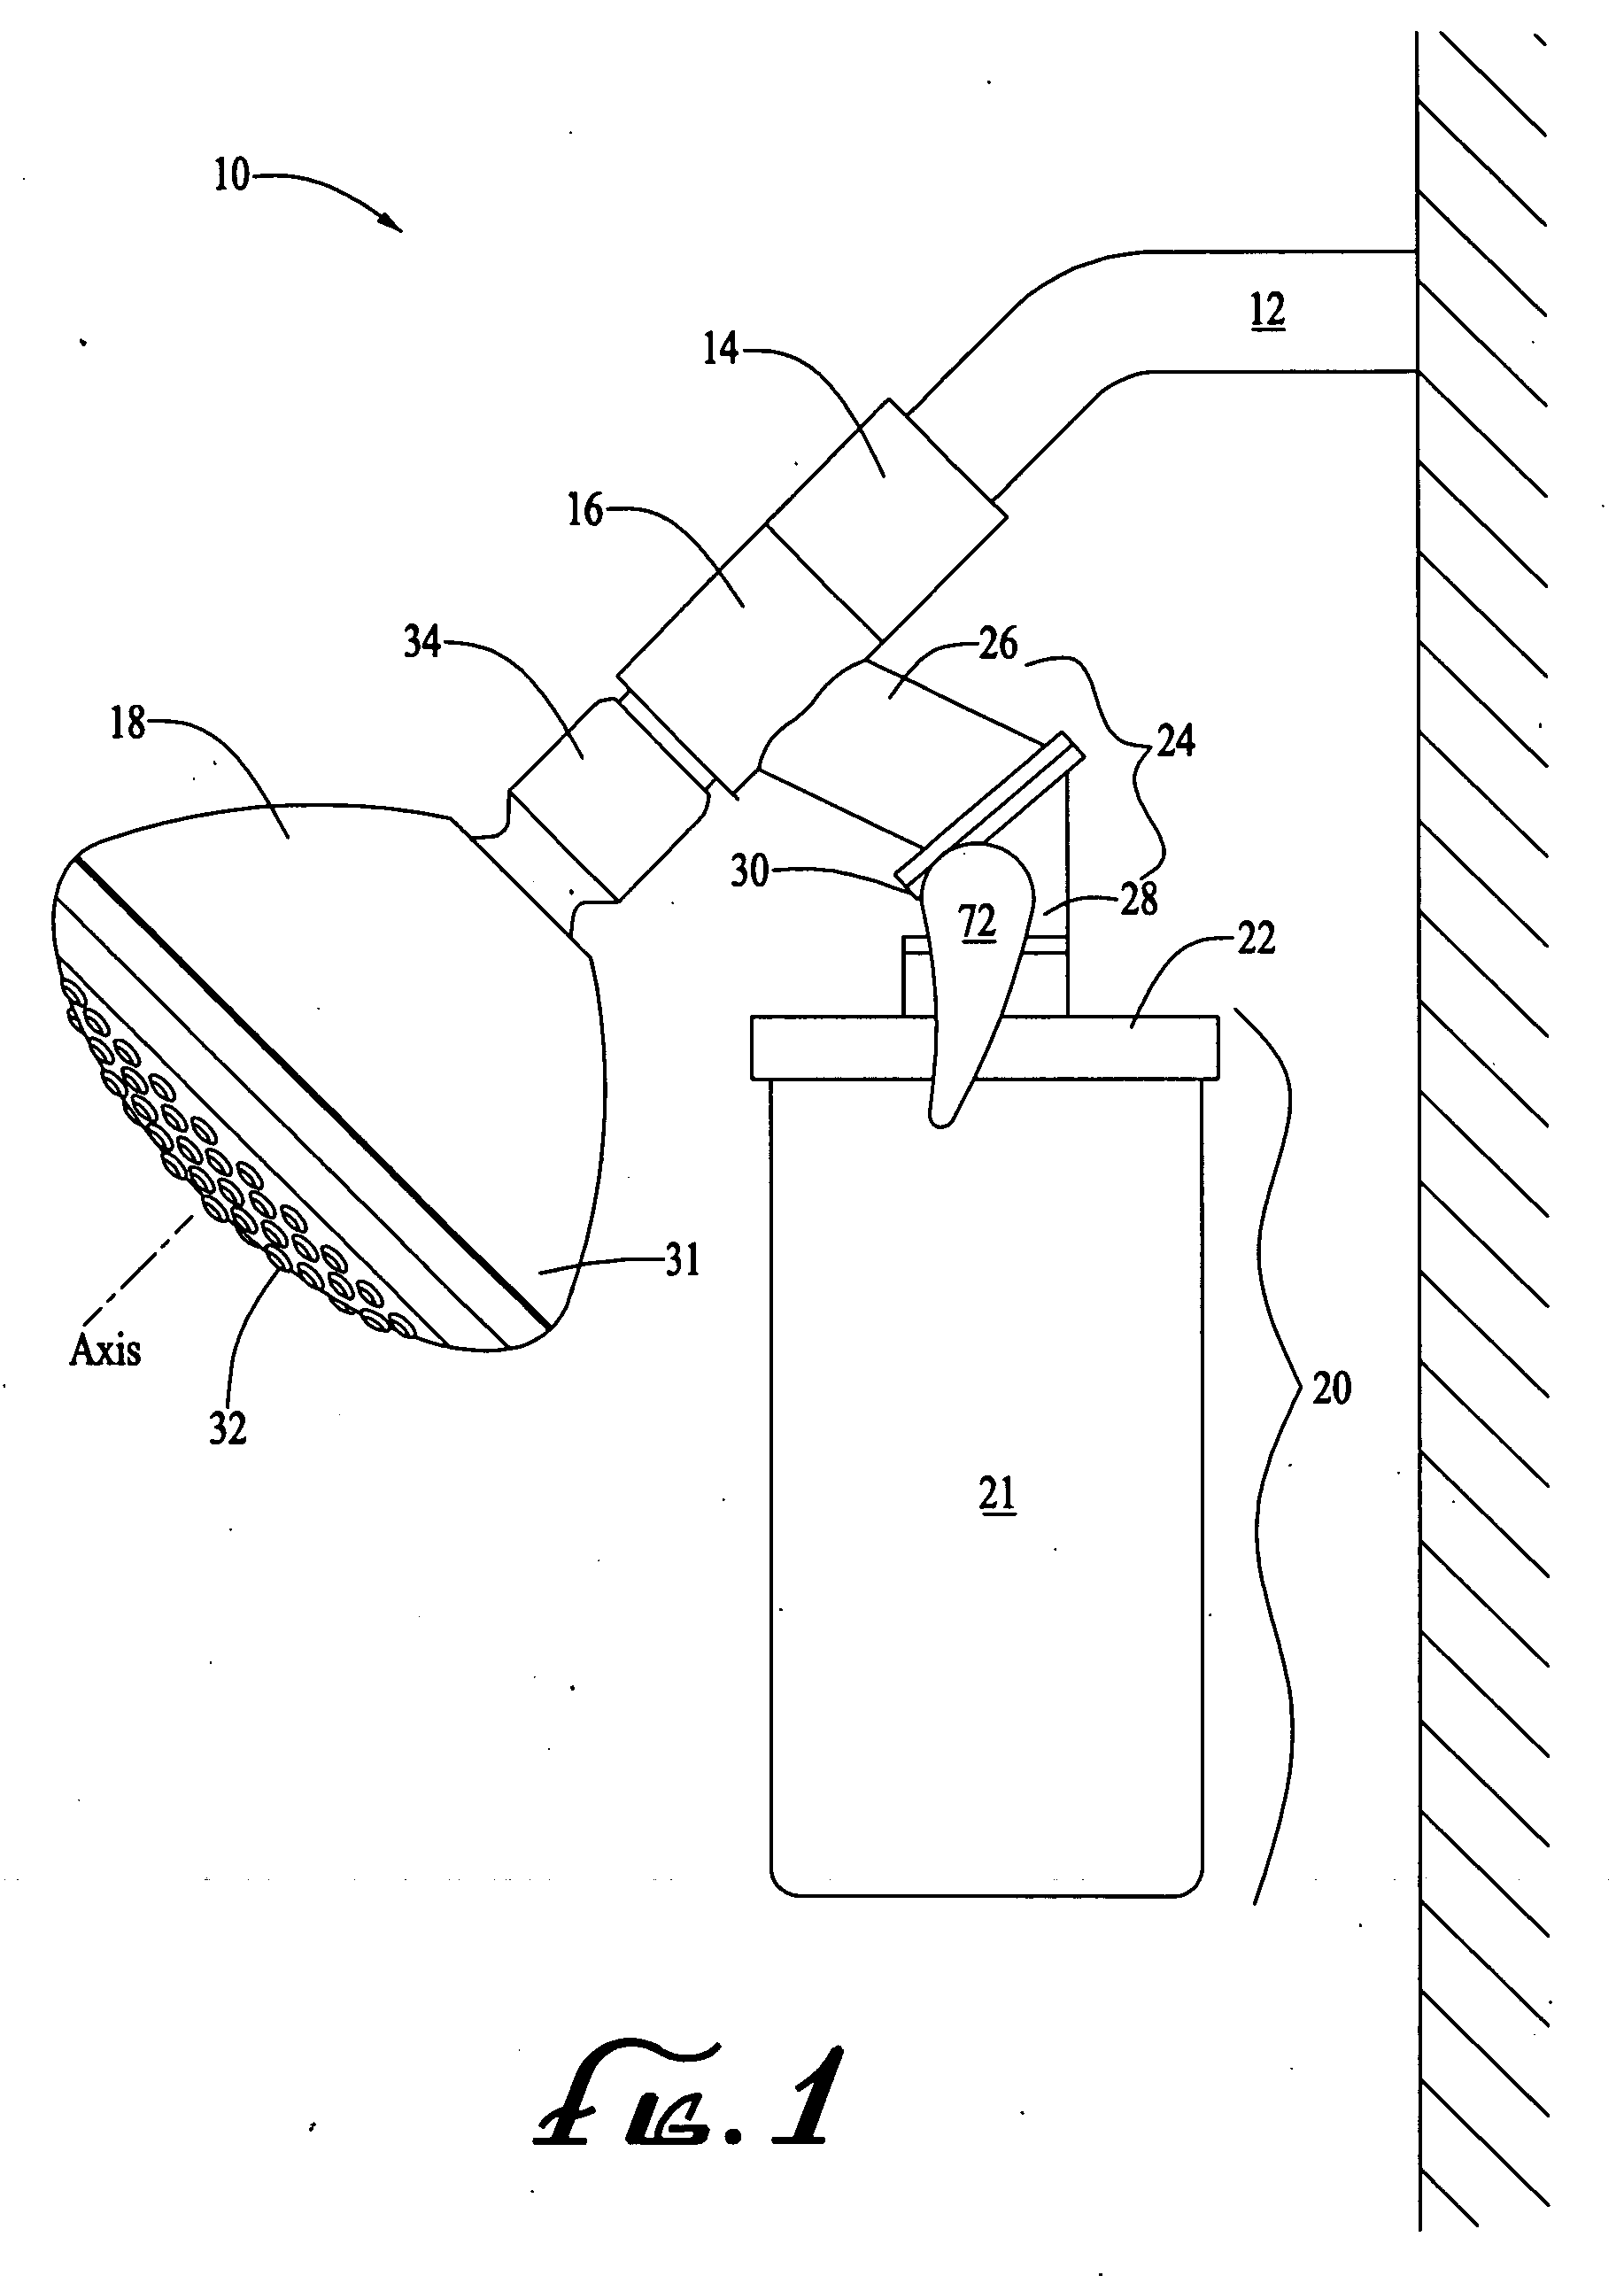 Dispensing system and method for shower arm